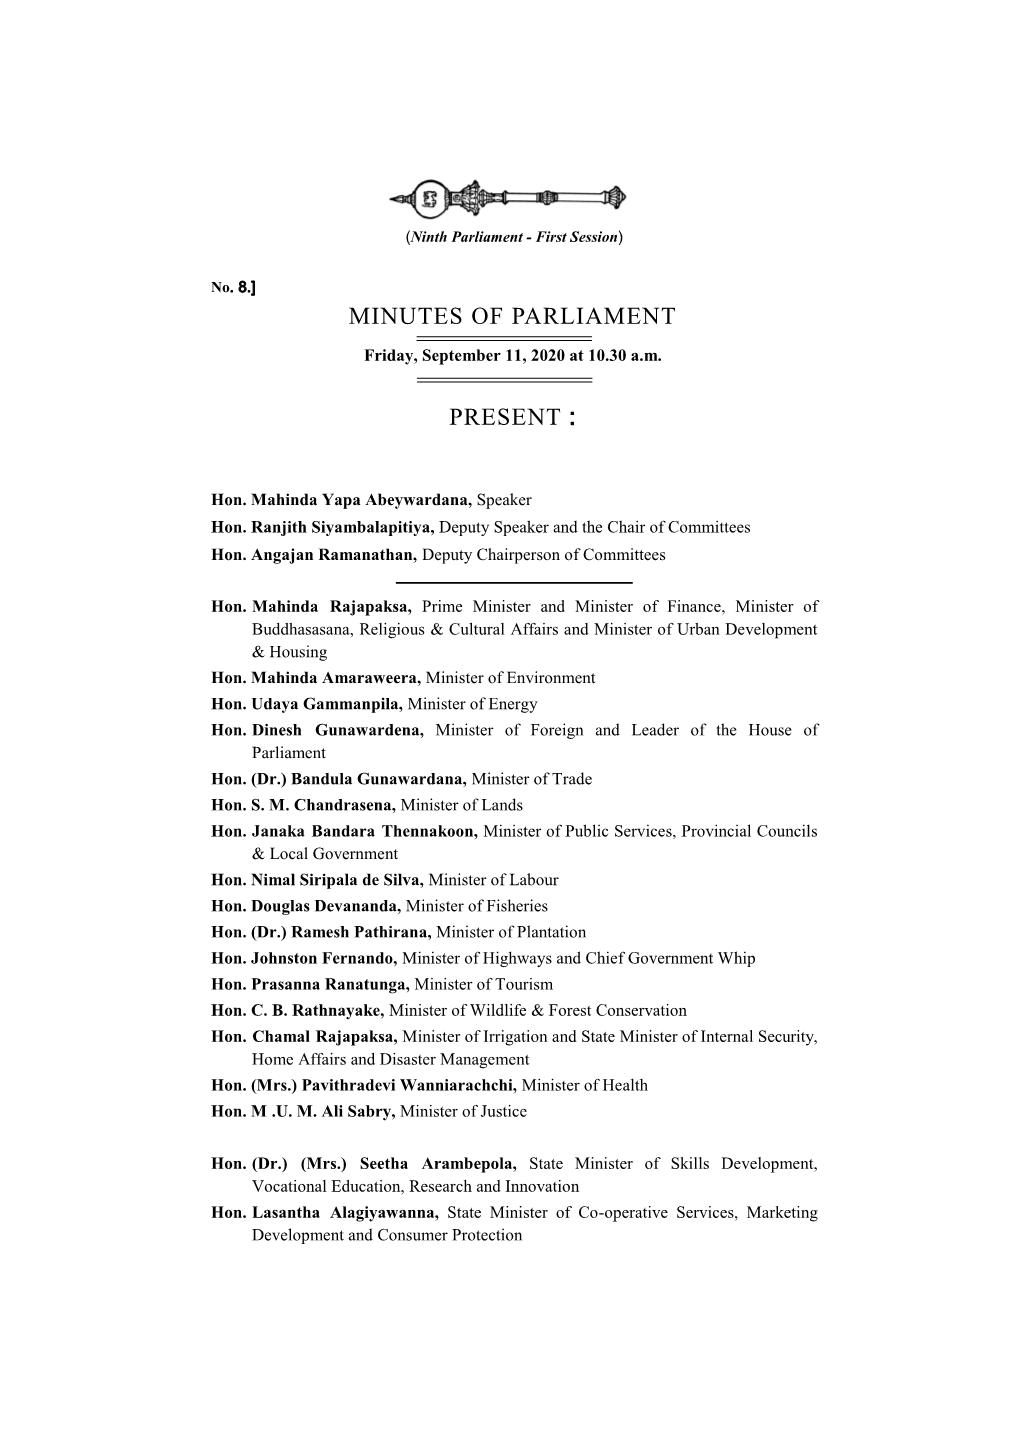 Minutes of Parliament for 11.09.2020